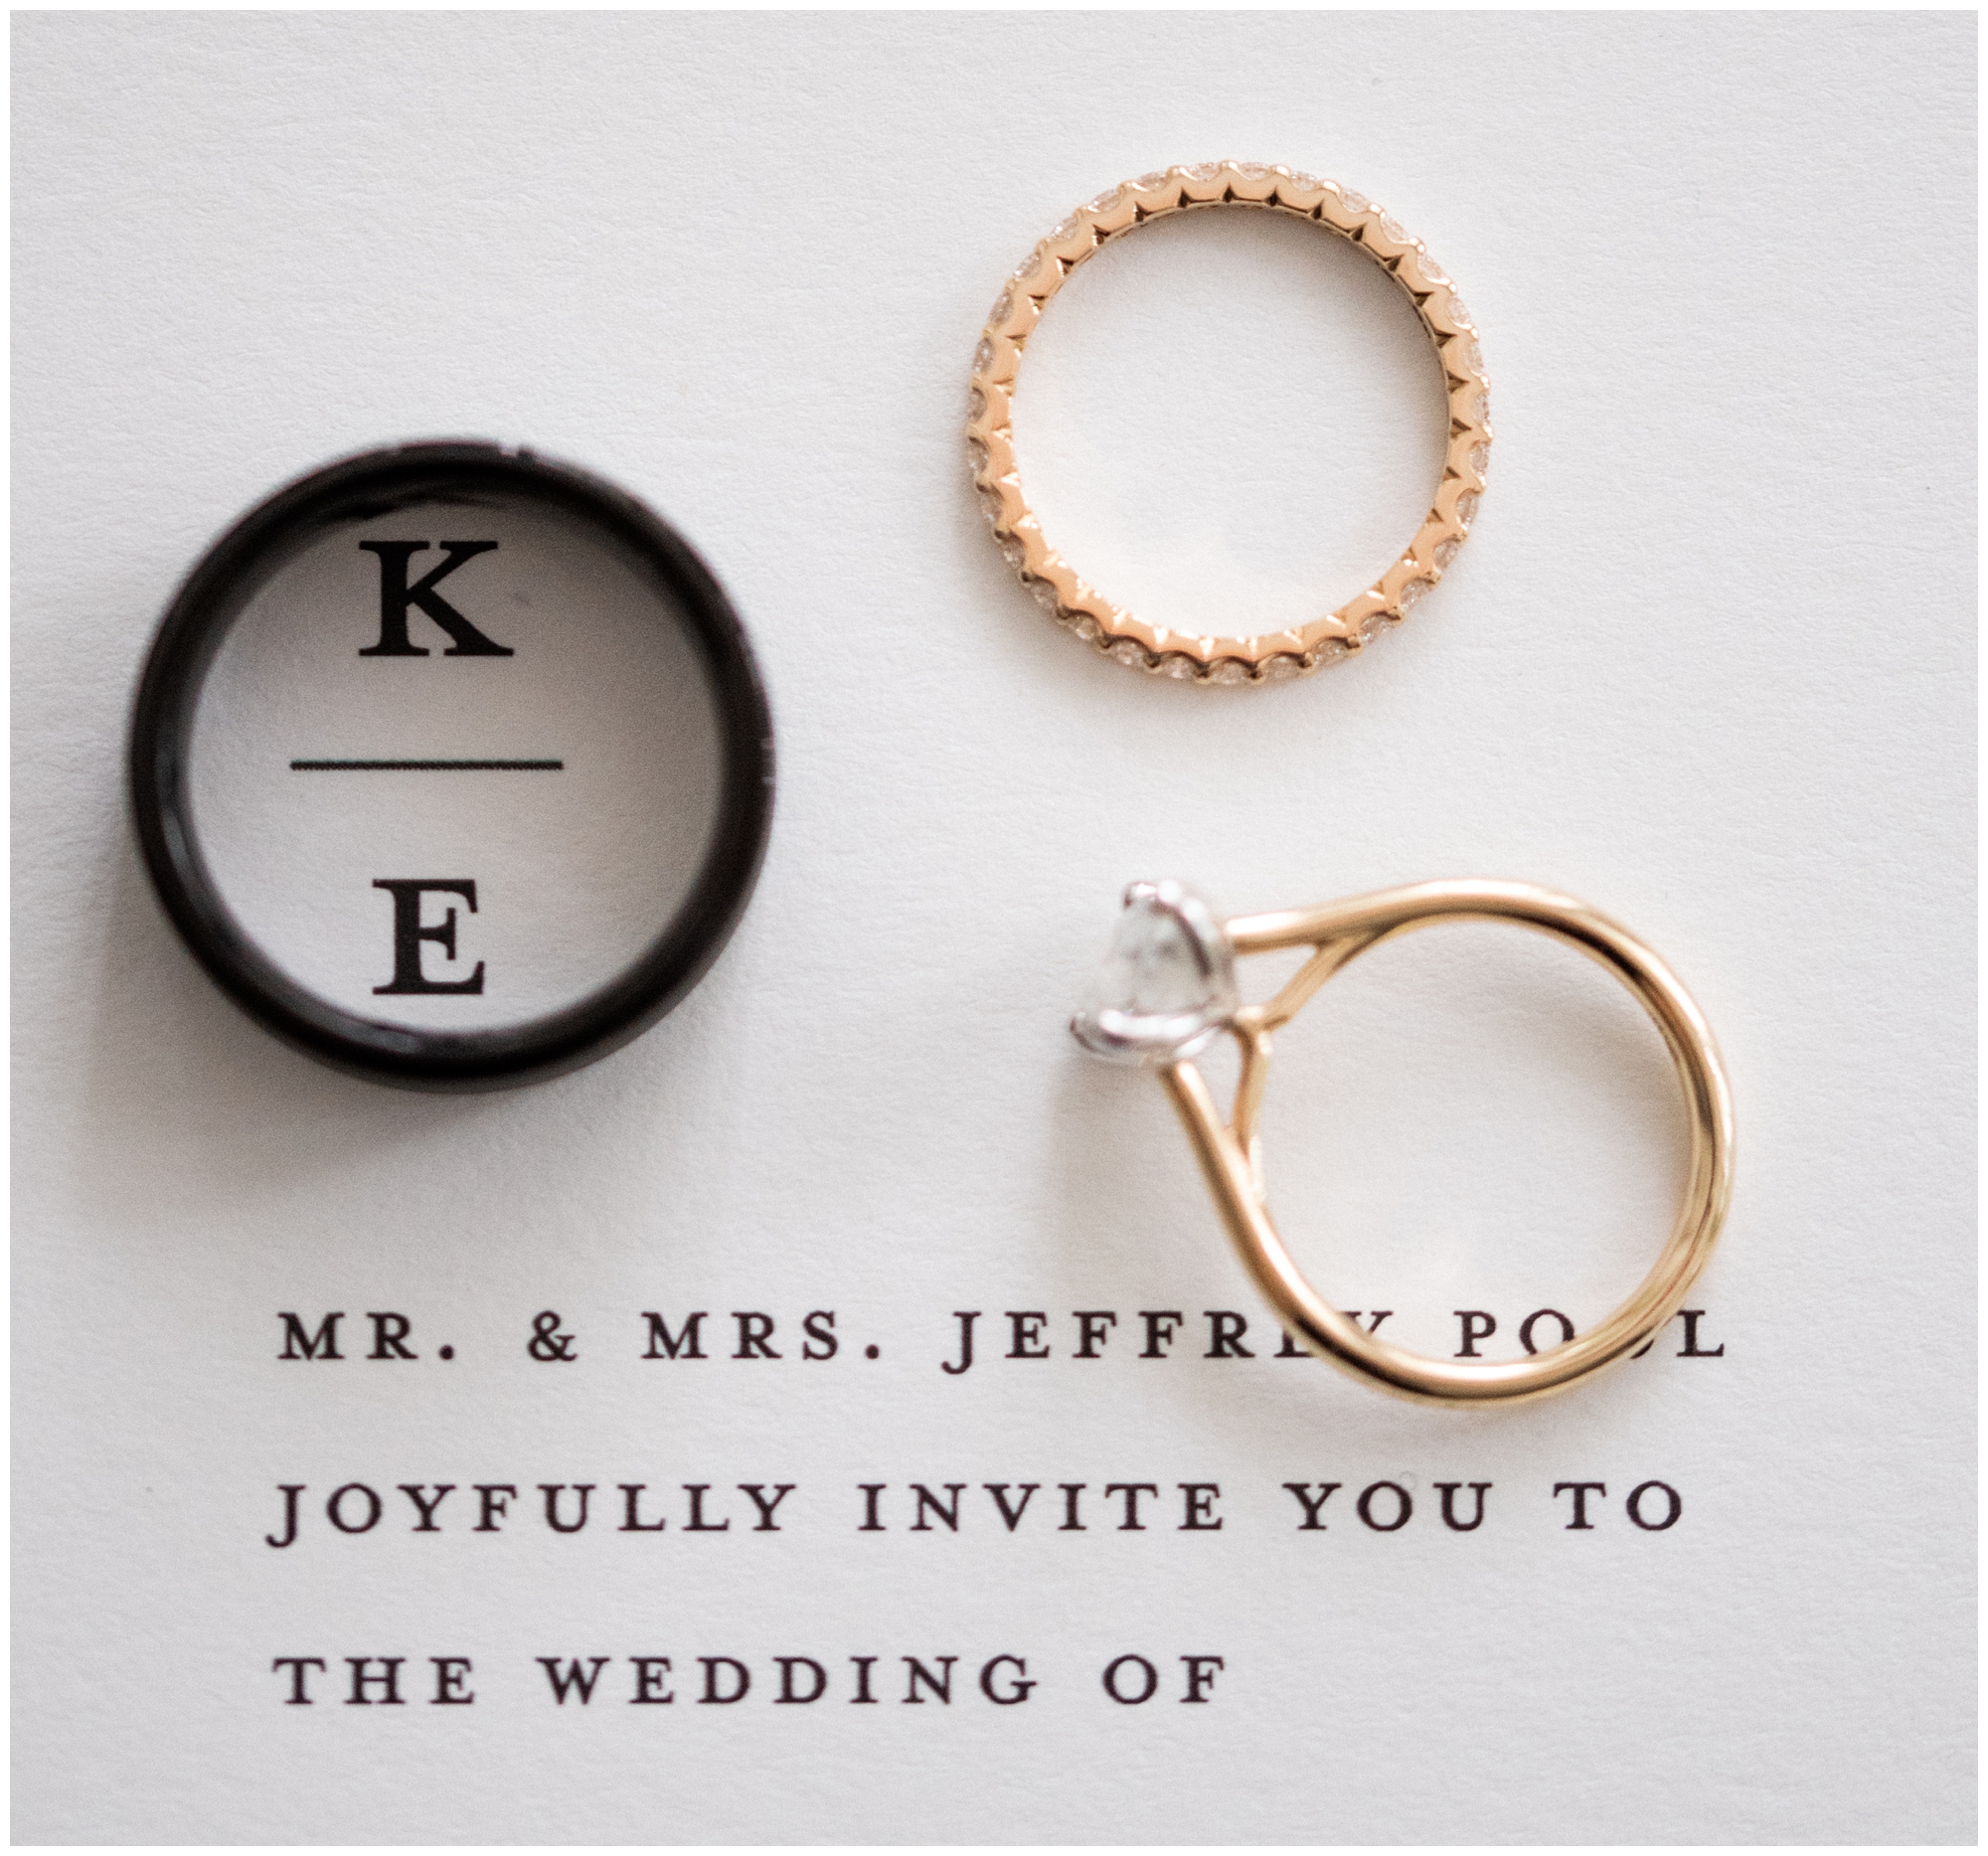 Wedding rings and invitation